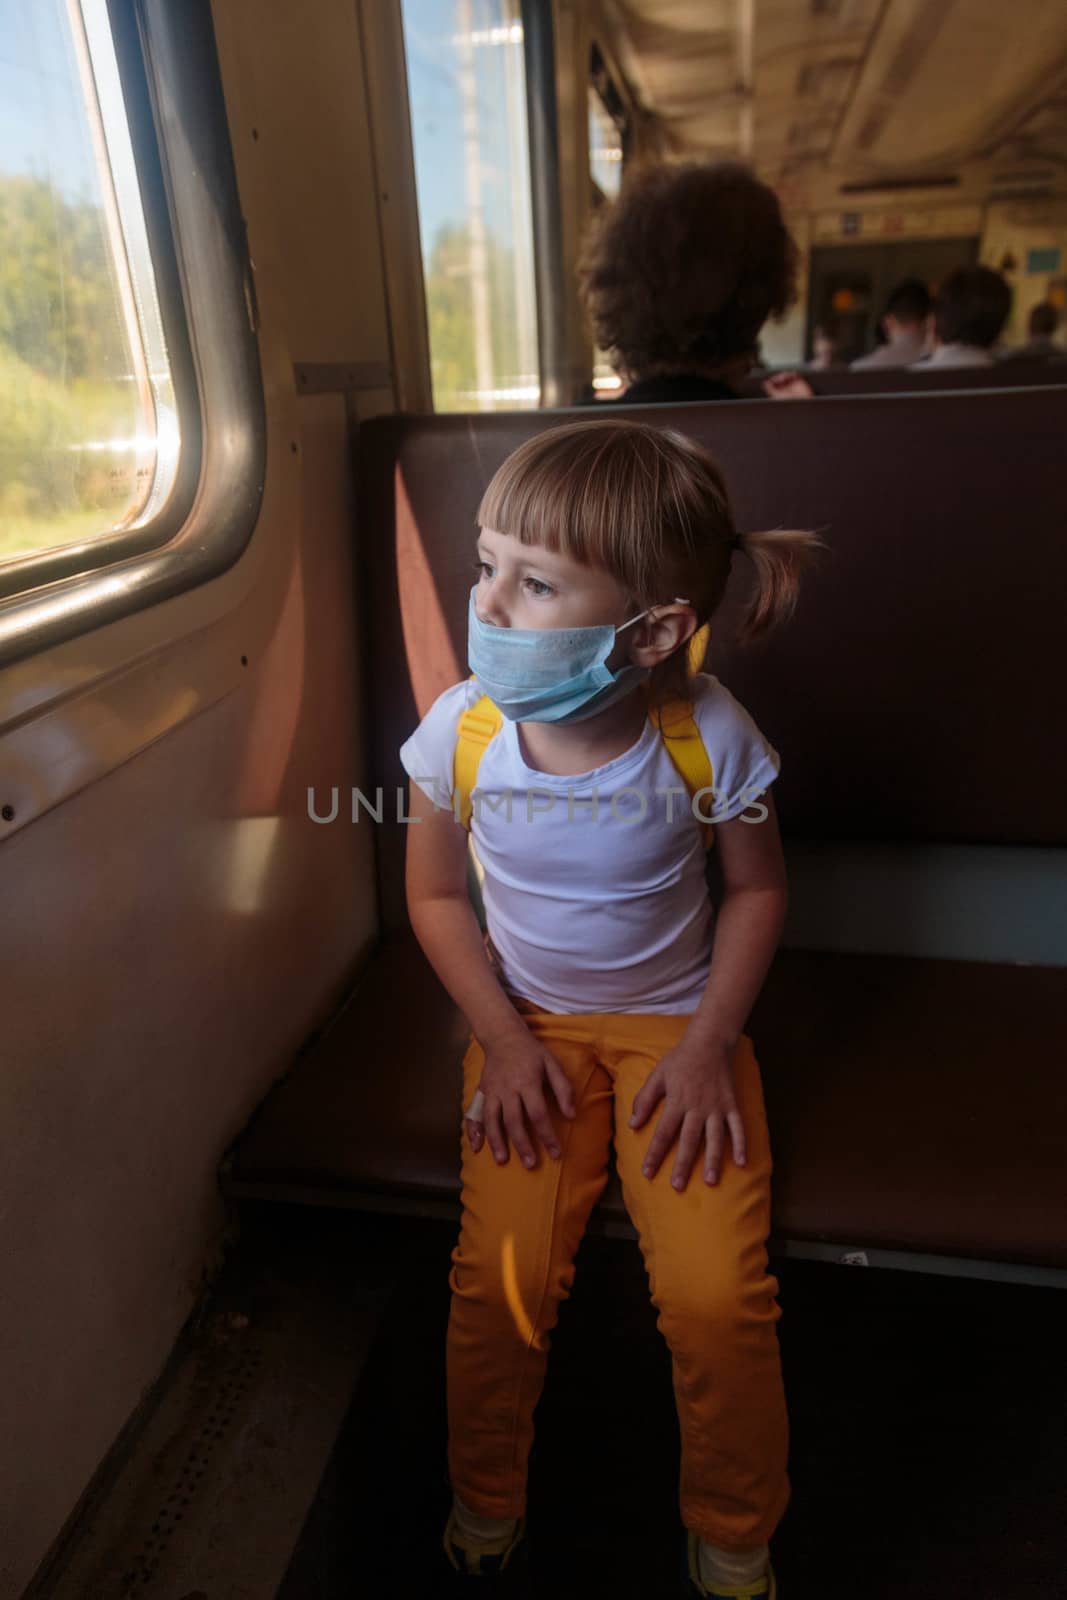 Little girl in a white T-shirt and jeans and a medical mask is sitting in the train. Keep social distancing to avoid the spread of COVID-19. Safe travel.